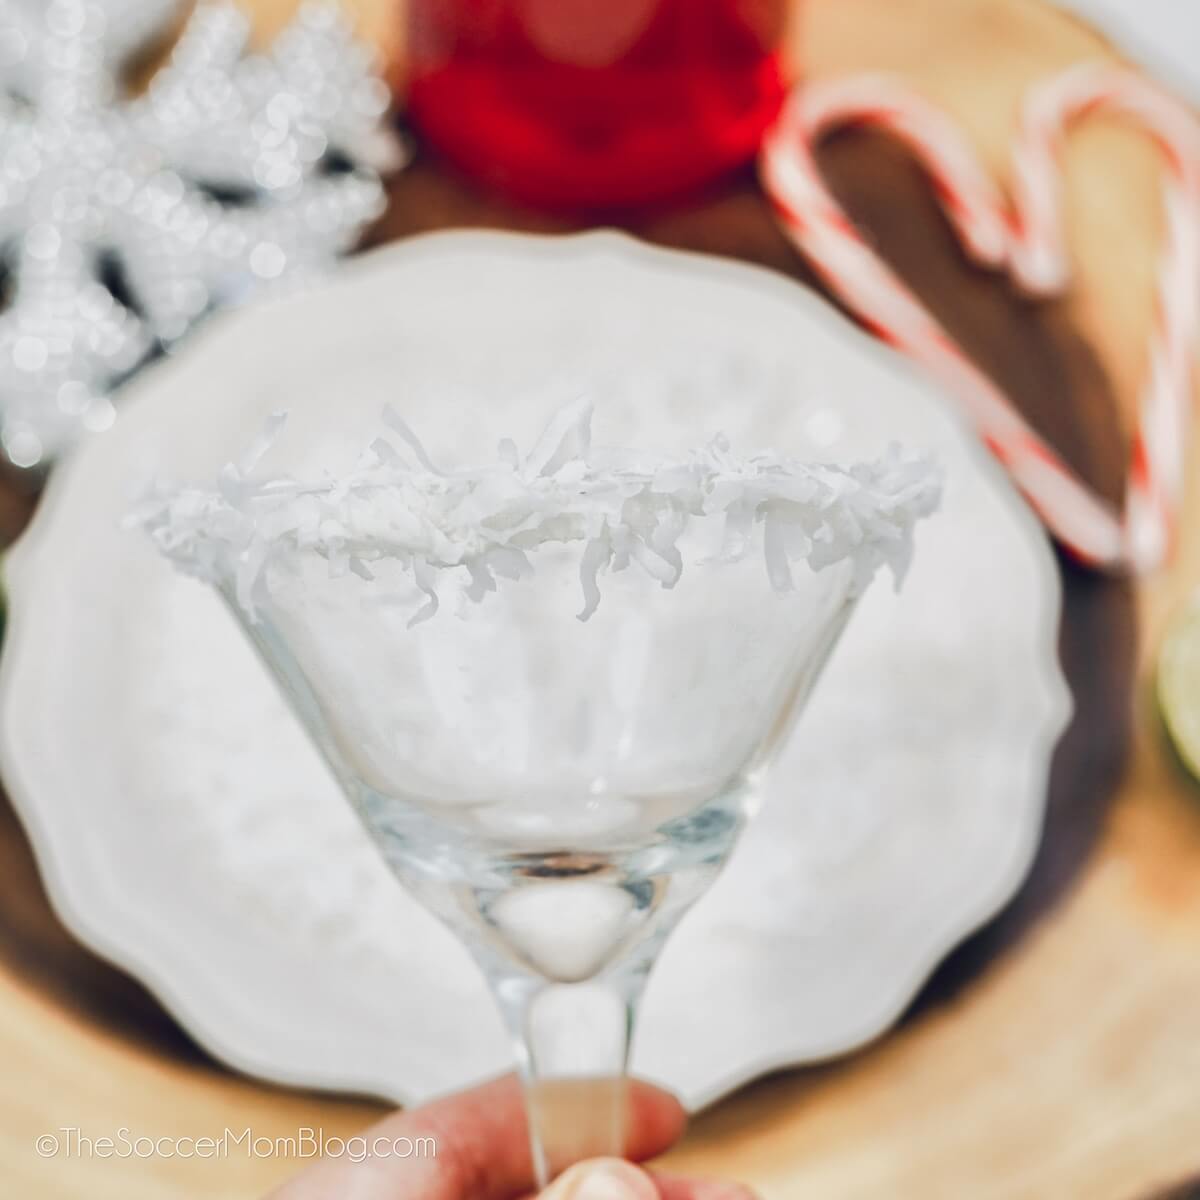 coating the rim of a martini glass with shredded coconut.